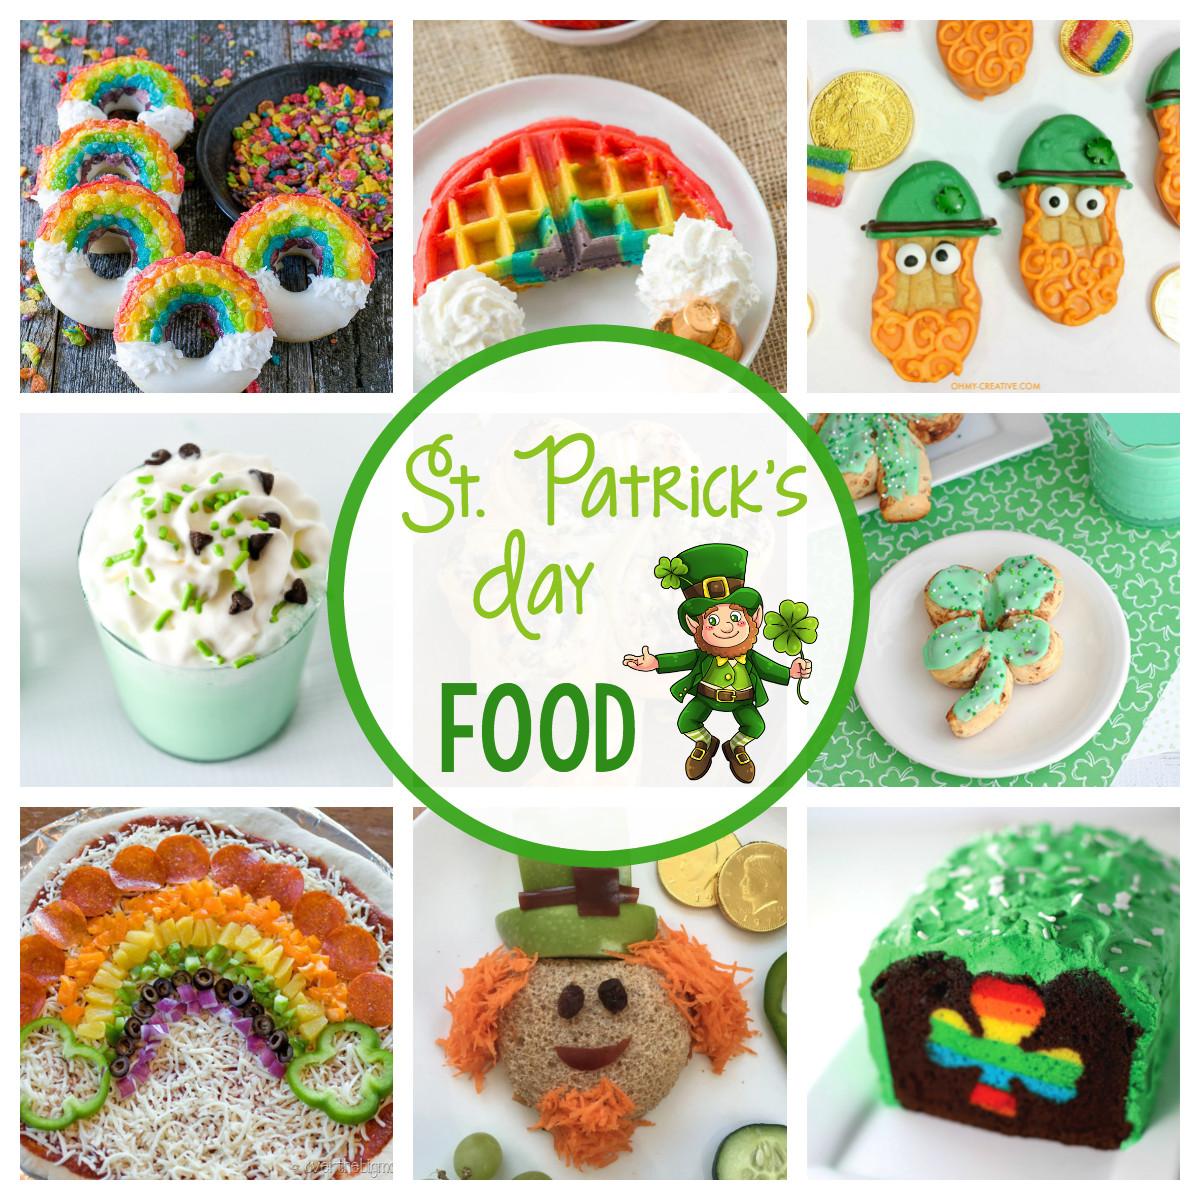 Saint Patrick's Day Food Ideas
 17 St Patrick s Day Food Ideas for Kids – Fun Squared